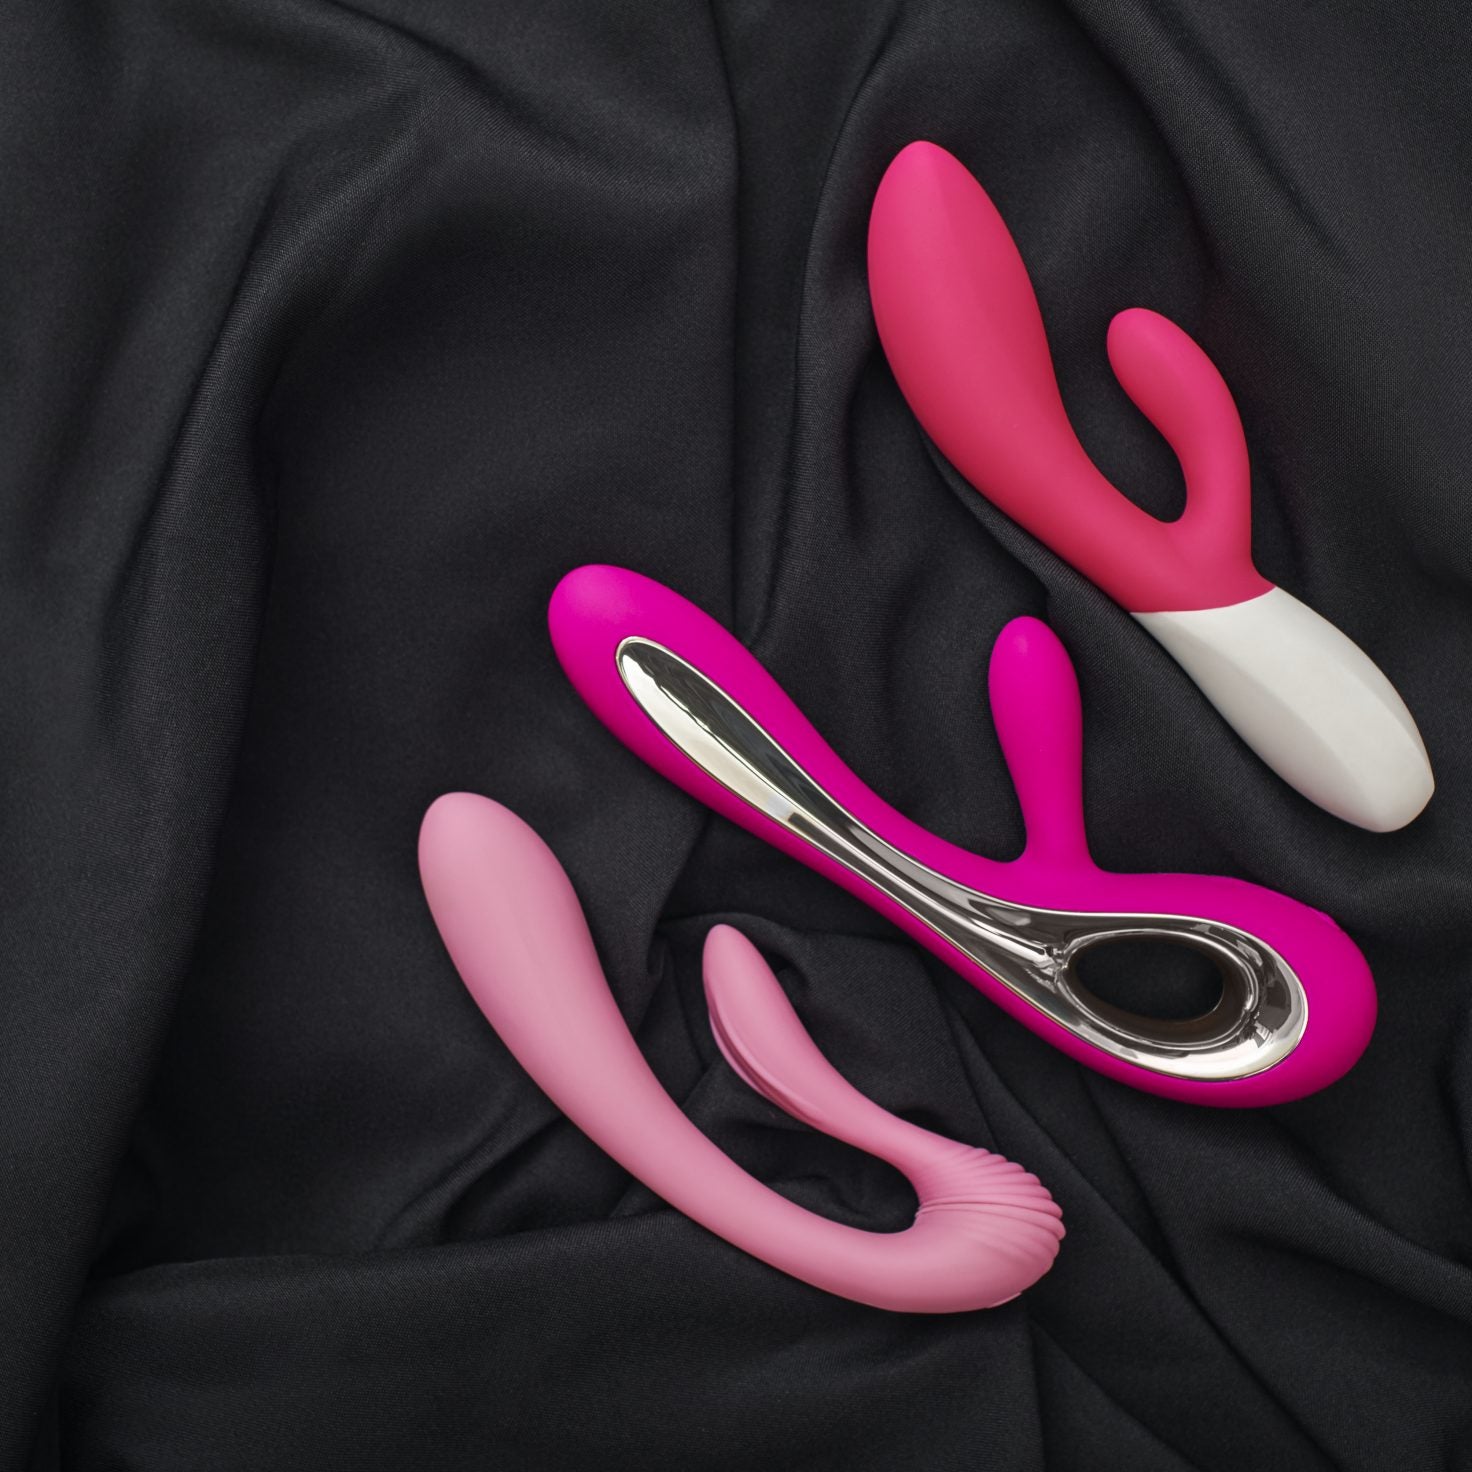 Ask An OB-GYN: What's The Proper Way To Clean My Vibrators and Sexy Toys?